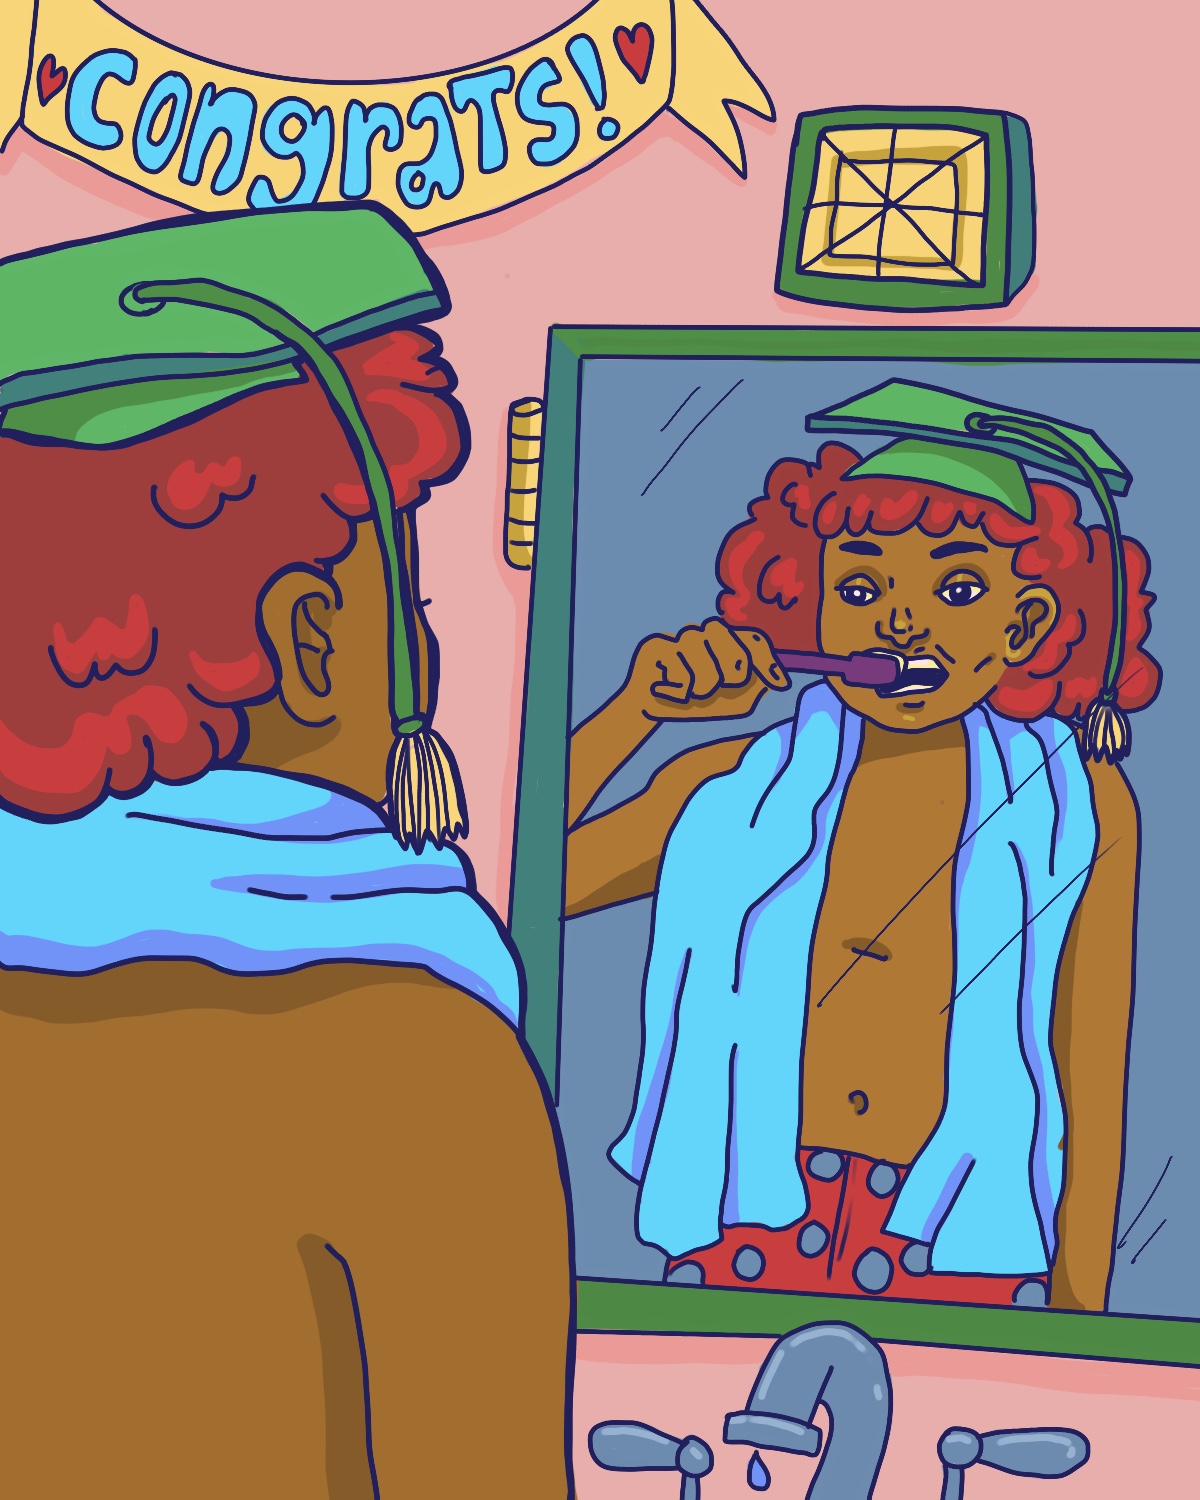 A colorful illustration of a student wearing their graduation cap while brushing their teeth in the mirror at home.